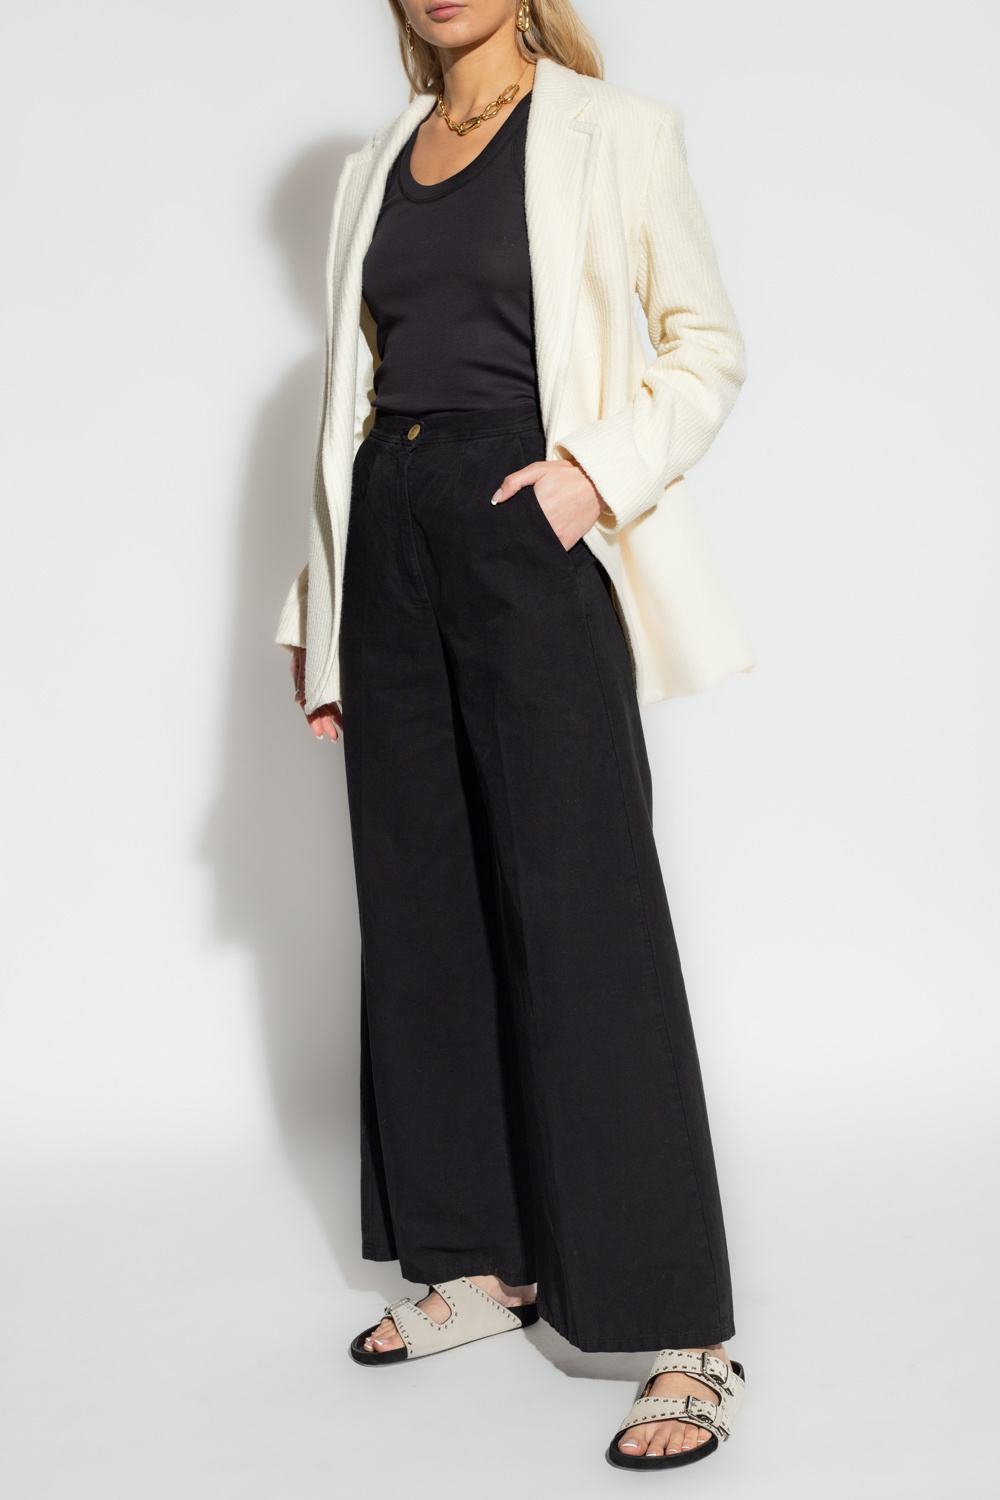 forte_forte Pleat-front Sch trousers